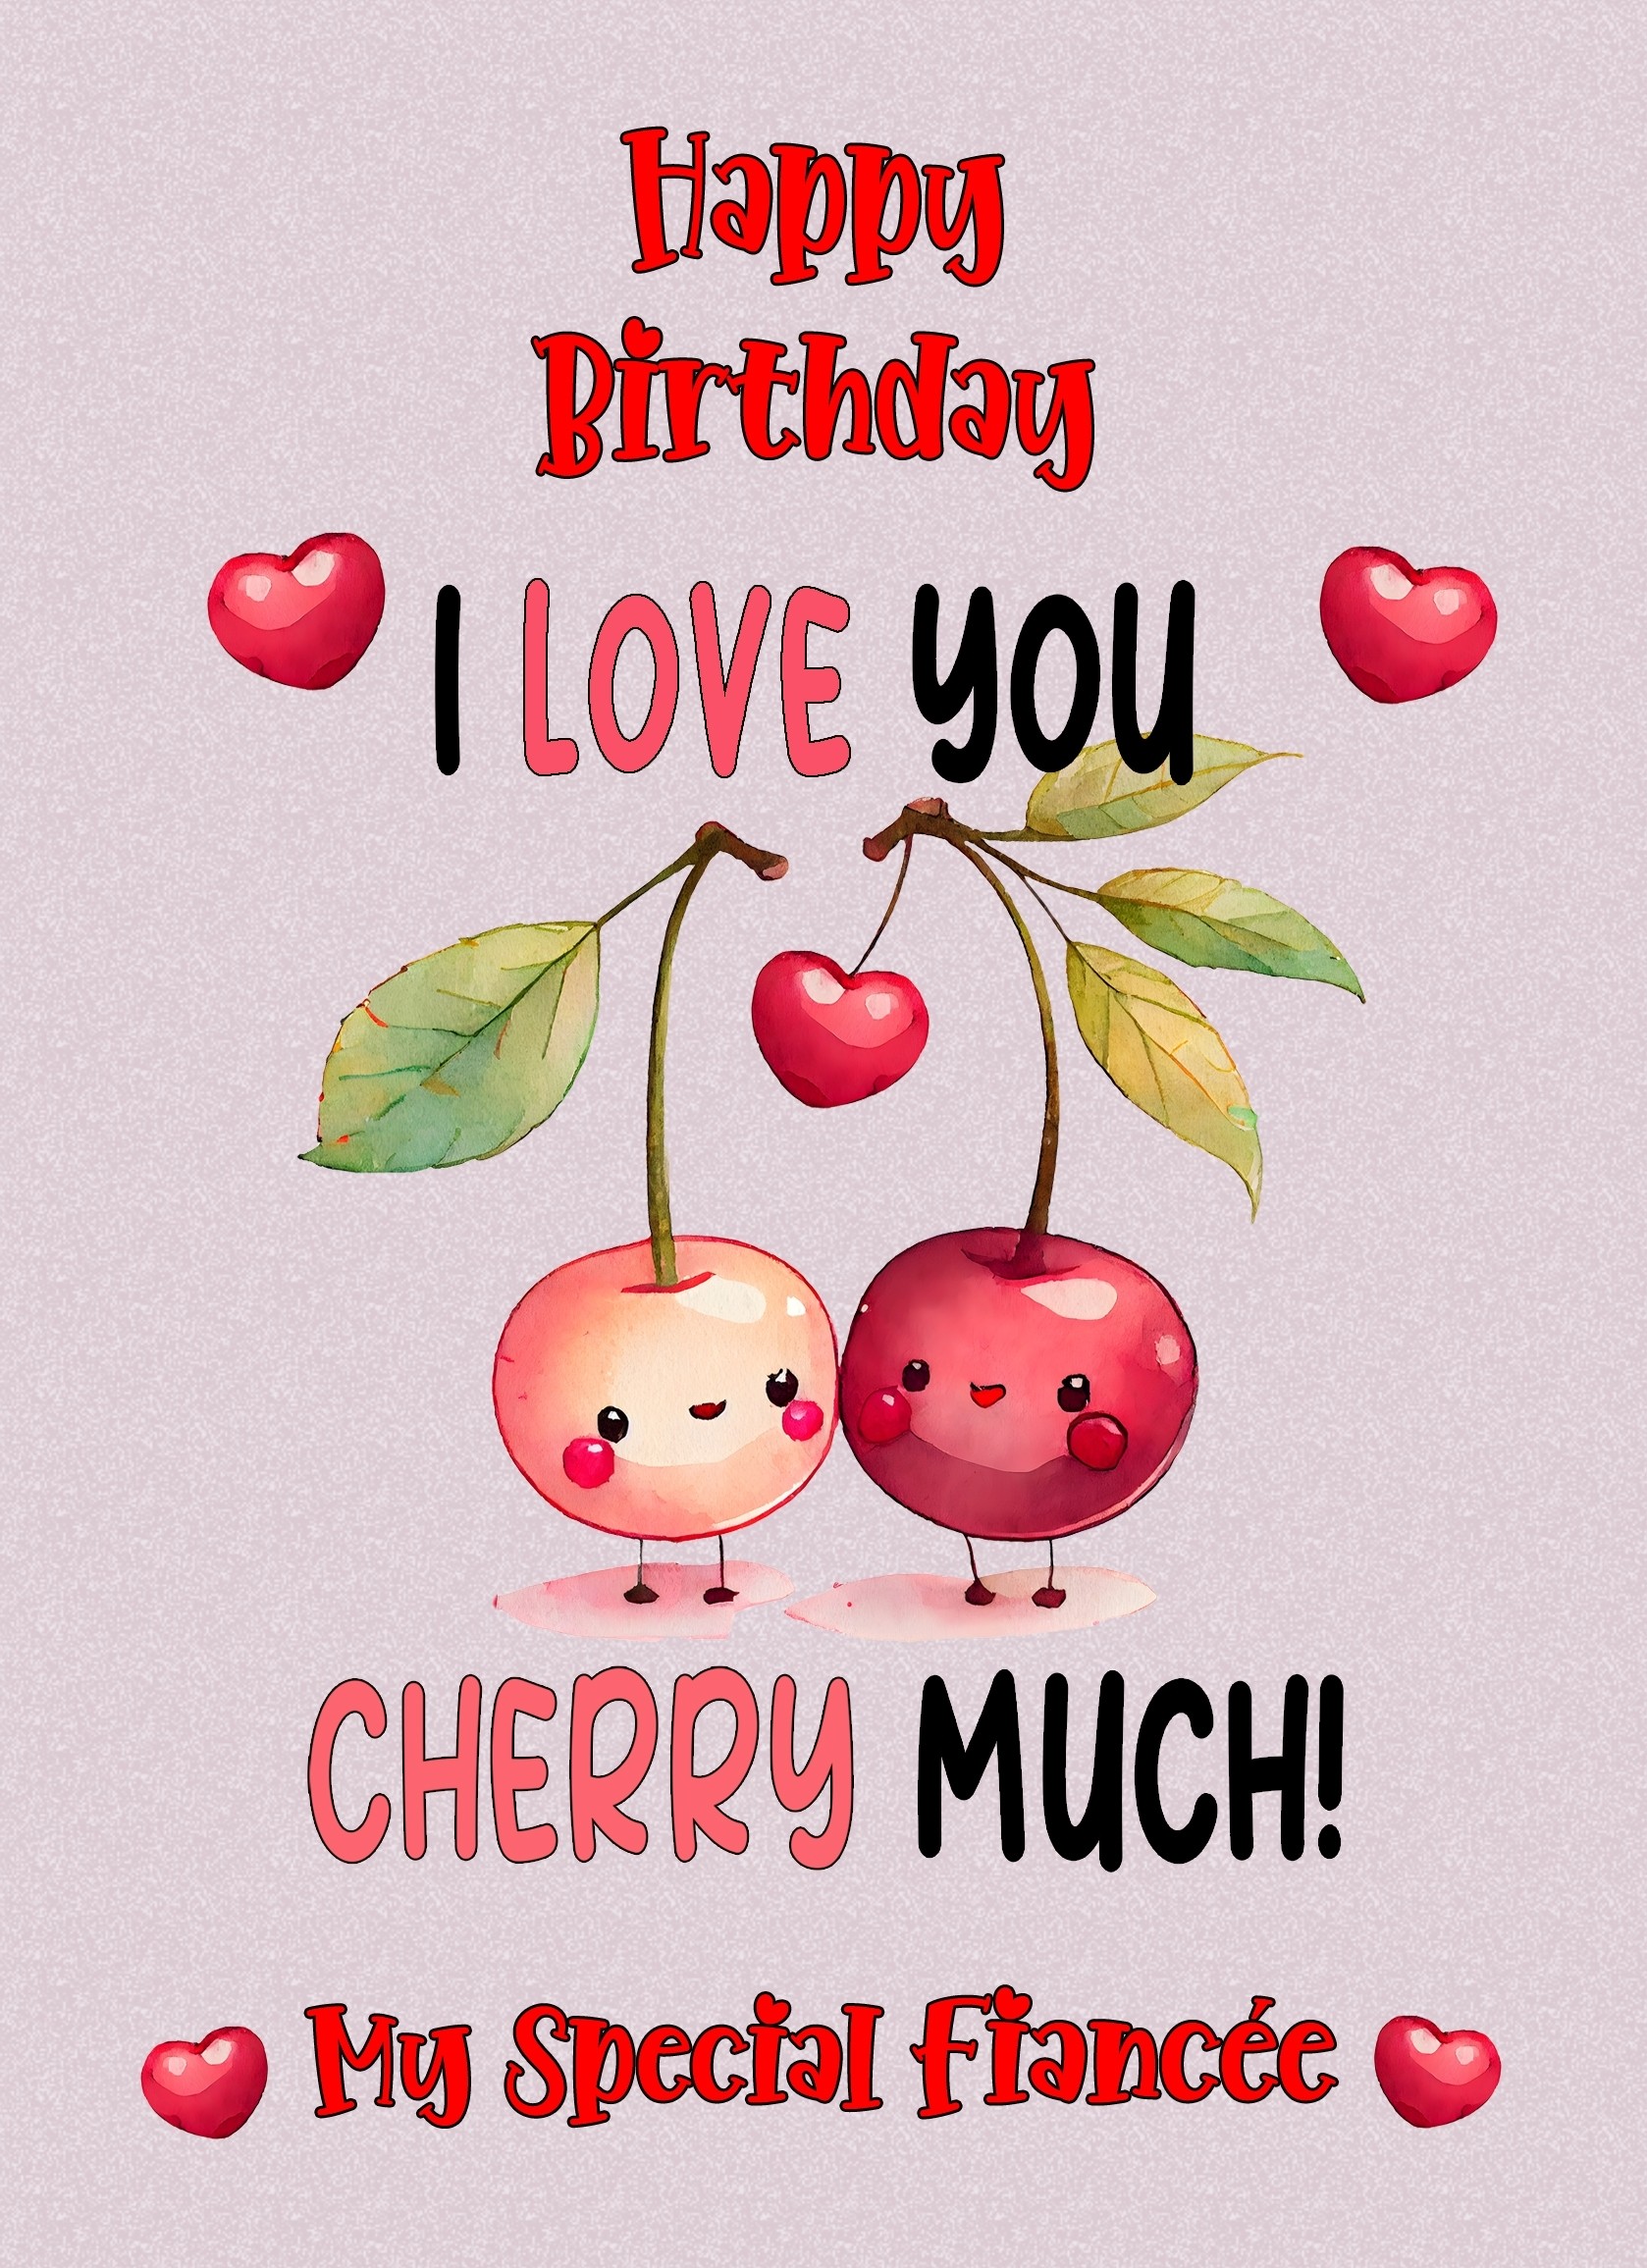 Funny Pun Romantic Birthday Card for Fiancee (Cherry Much)